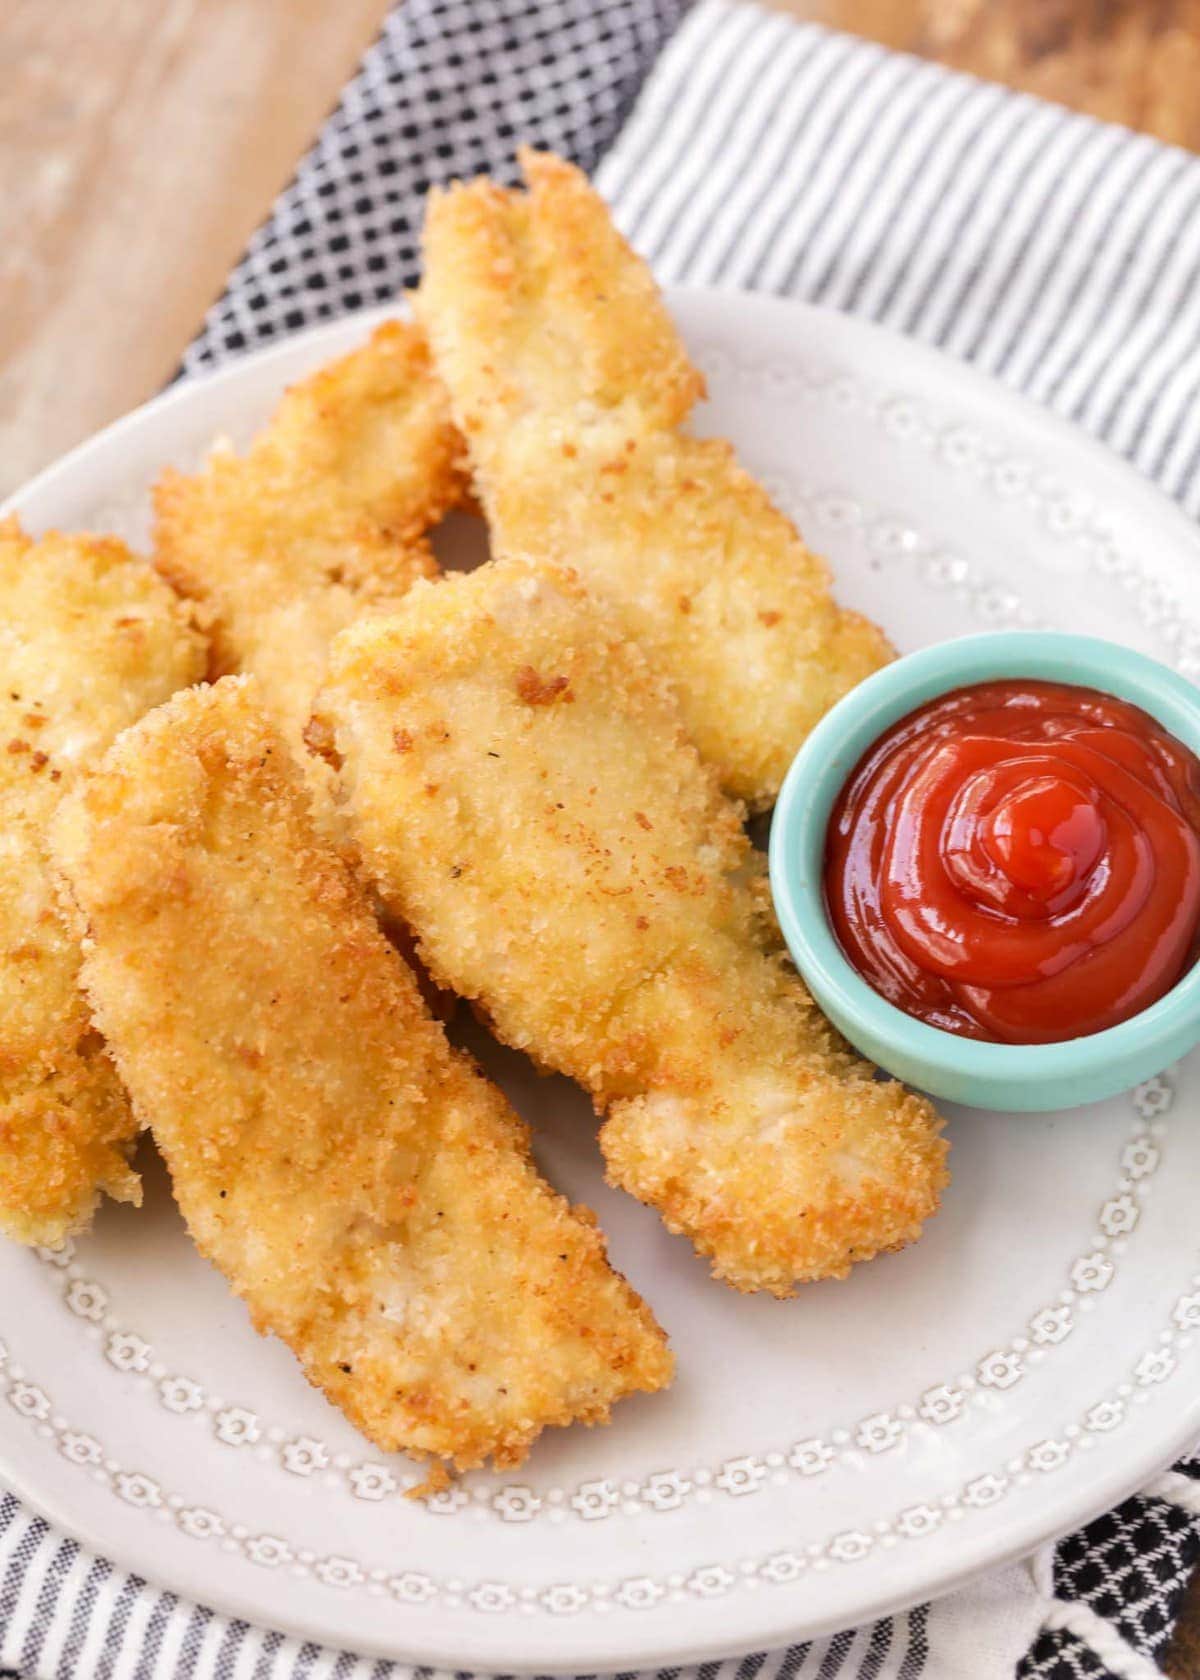 Homemade chicken tenders on a plate with a side of ketchup